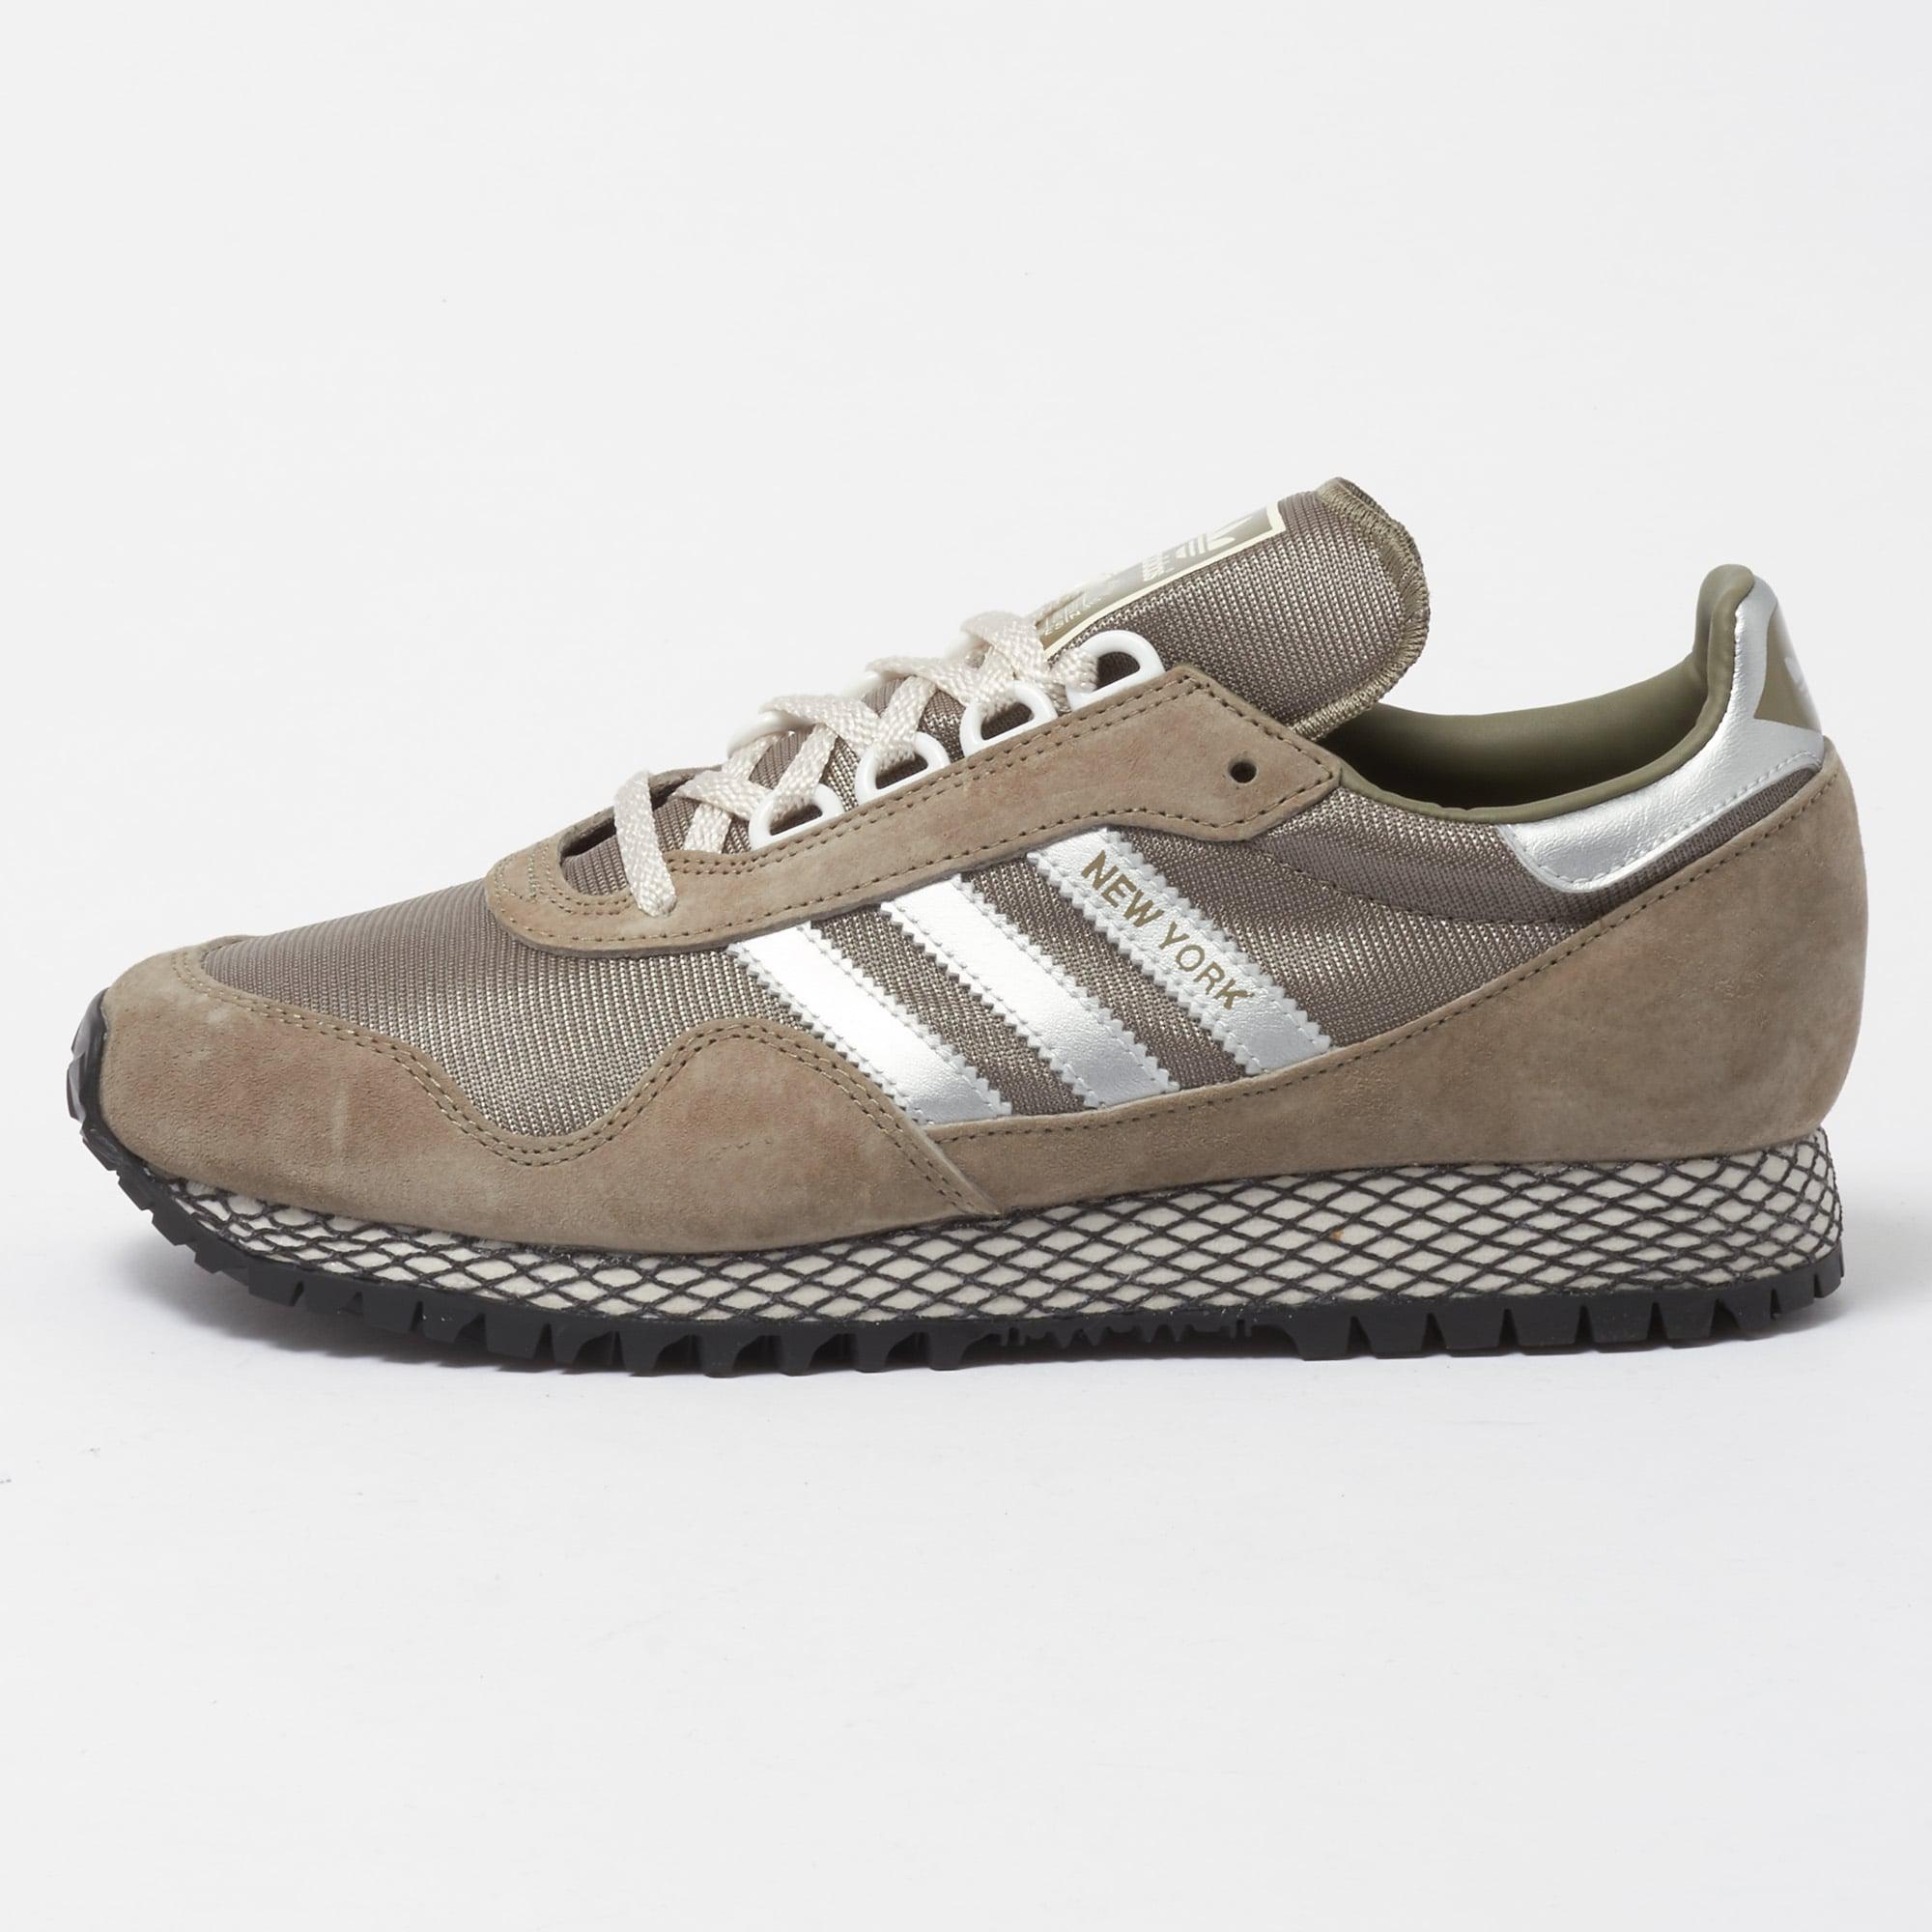 adidas Originals Leather New York - Trace Cargo for Men - Lyst